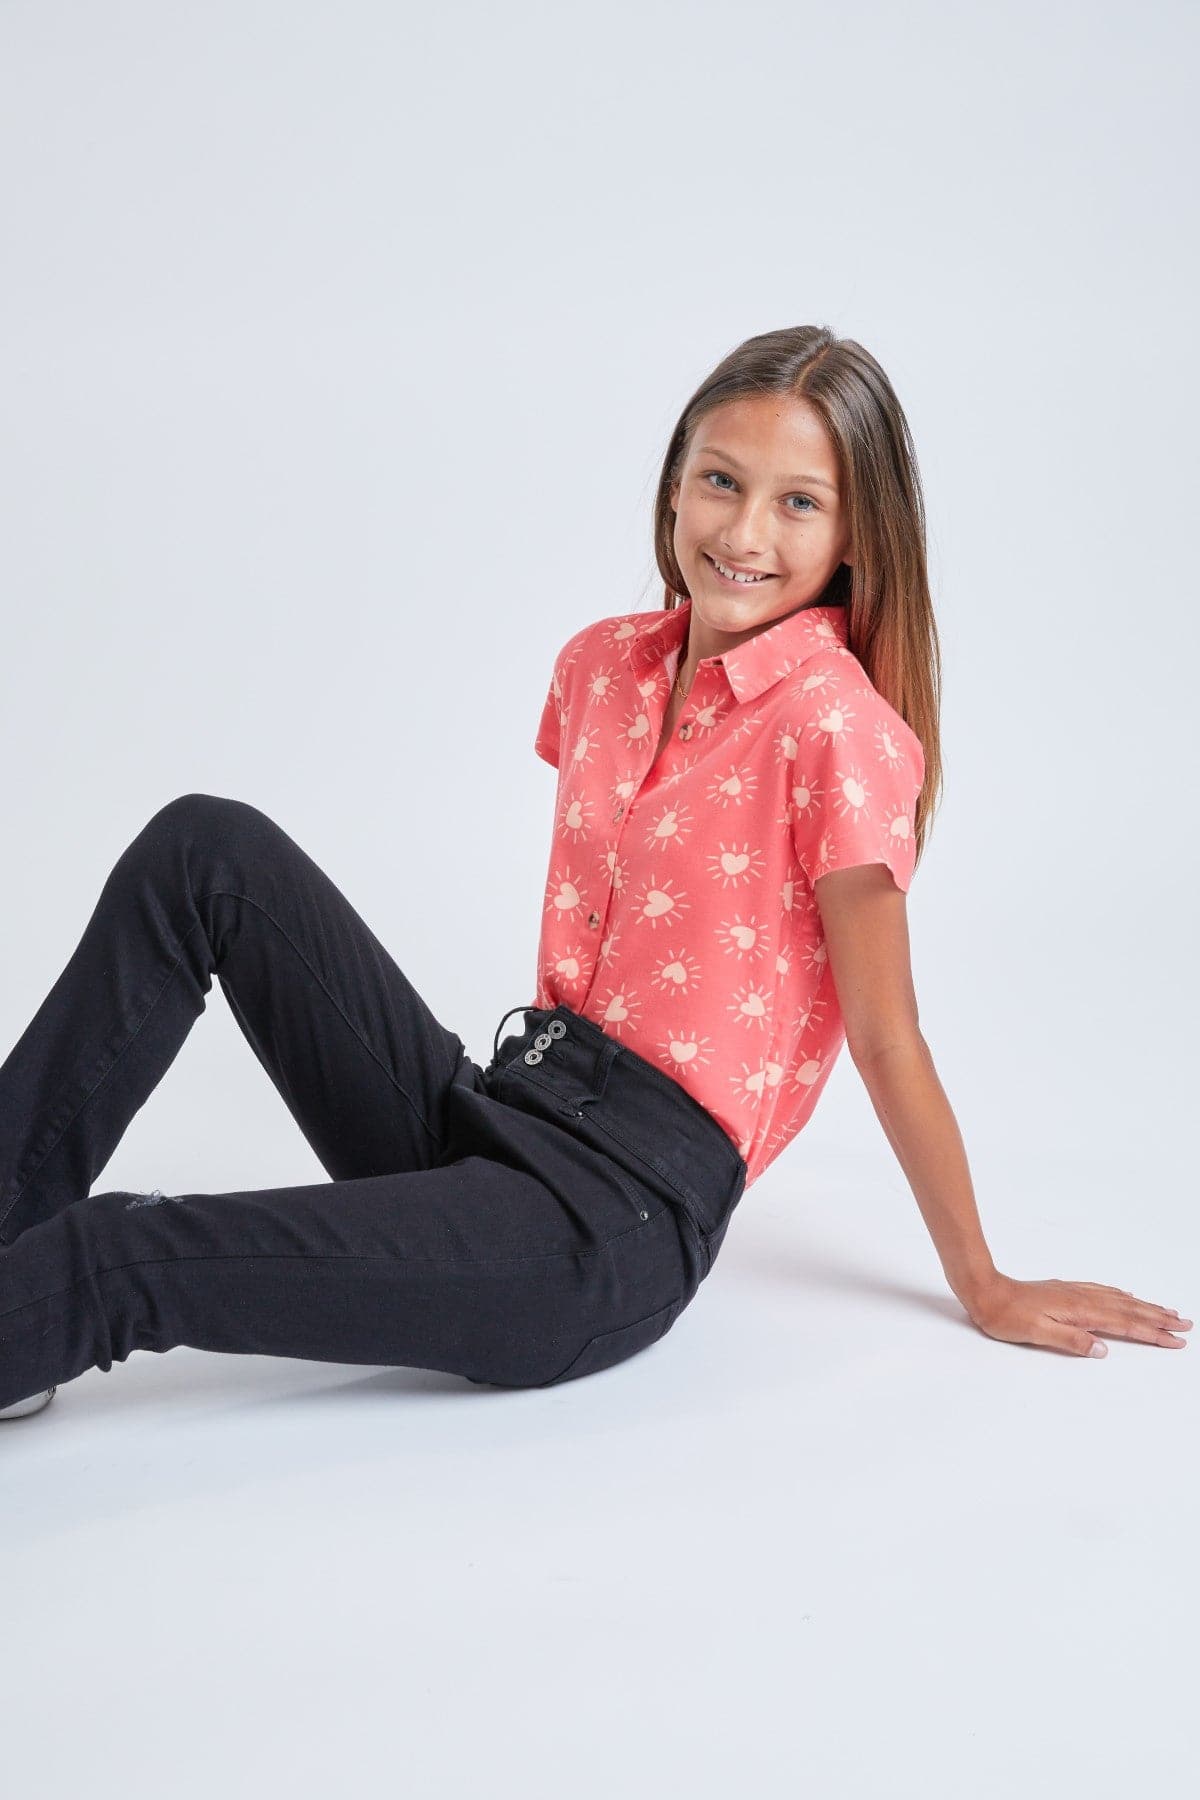 Girls 3 Button Essential Skinny Jeans With Faux Front Pockets